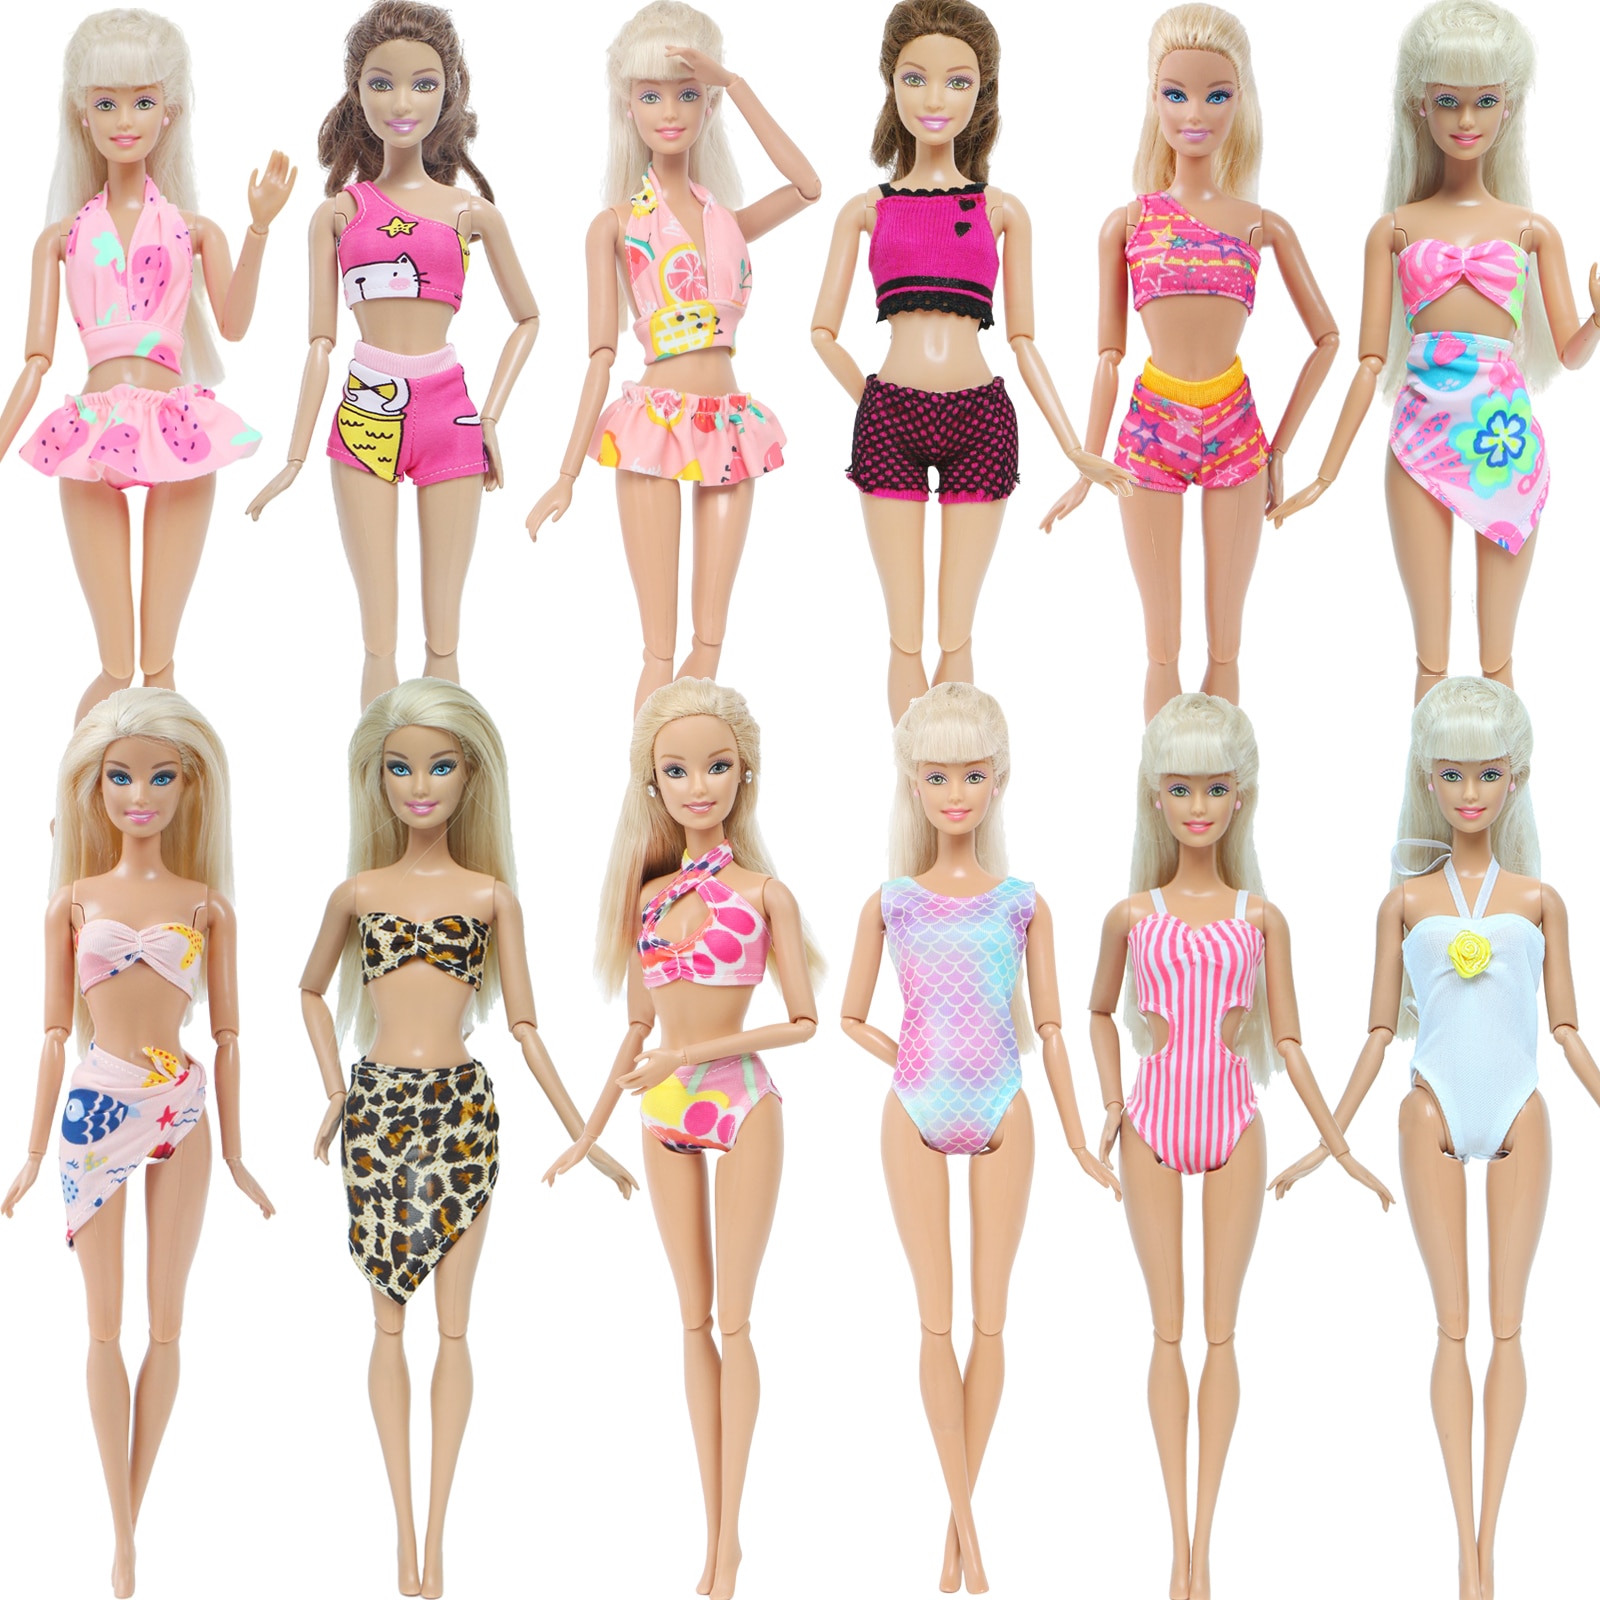 Lot Doll Accessories Chair / Lifebuoy /Swimsuits Swimwear Bikini Swimming Outfit Beach Bathing Clothes for Barbie Doll Dollhouse